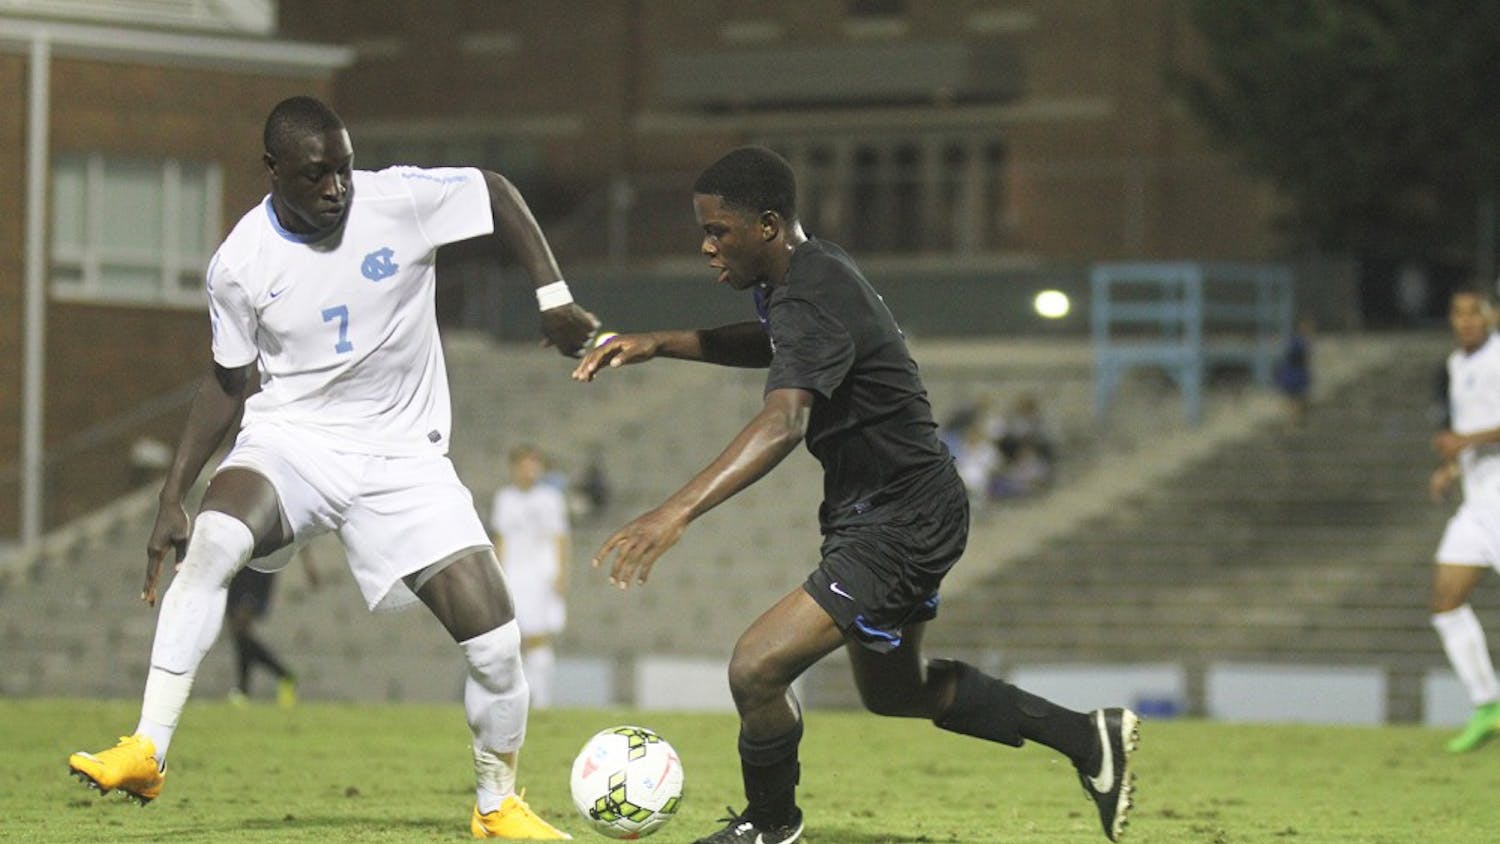 Nyambi Jabang goes up against a player from Georgia State’s men’s soccer team Tuesday. Jabang scored two goals for UNC.